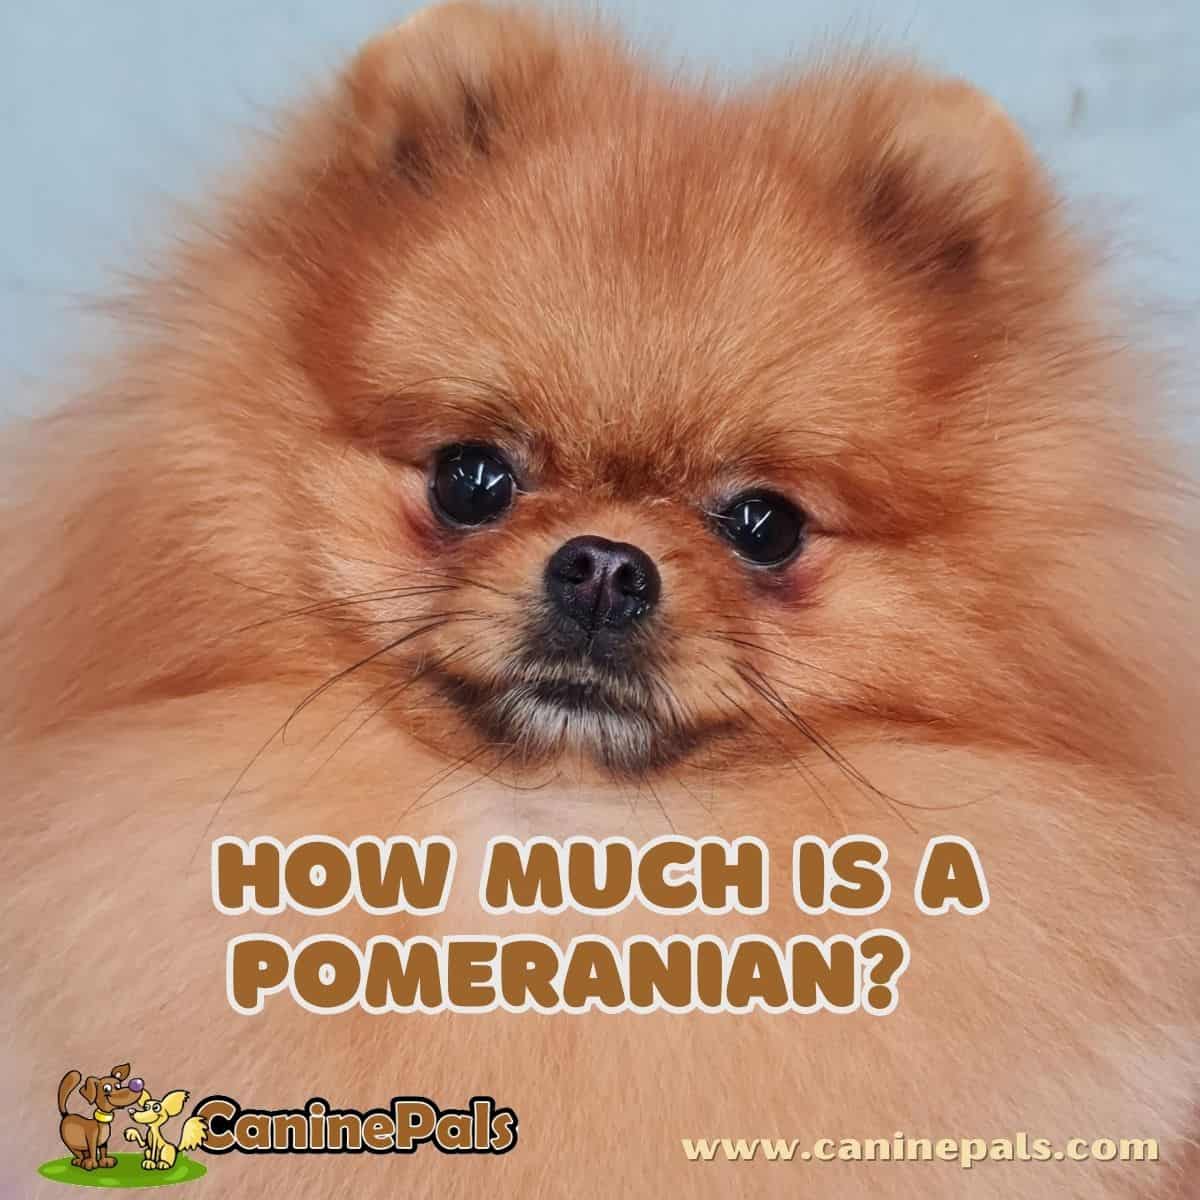 How Much Is a Pomeranian? 